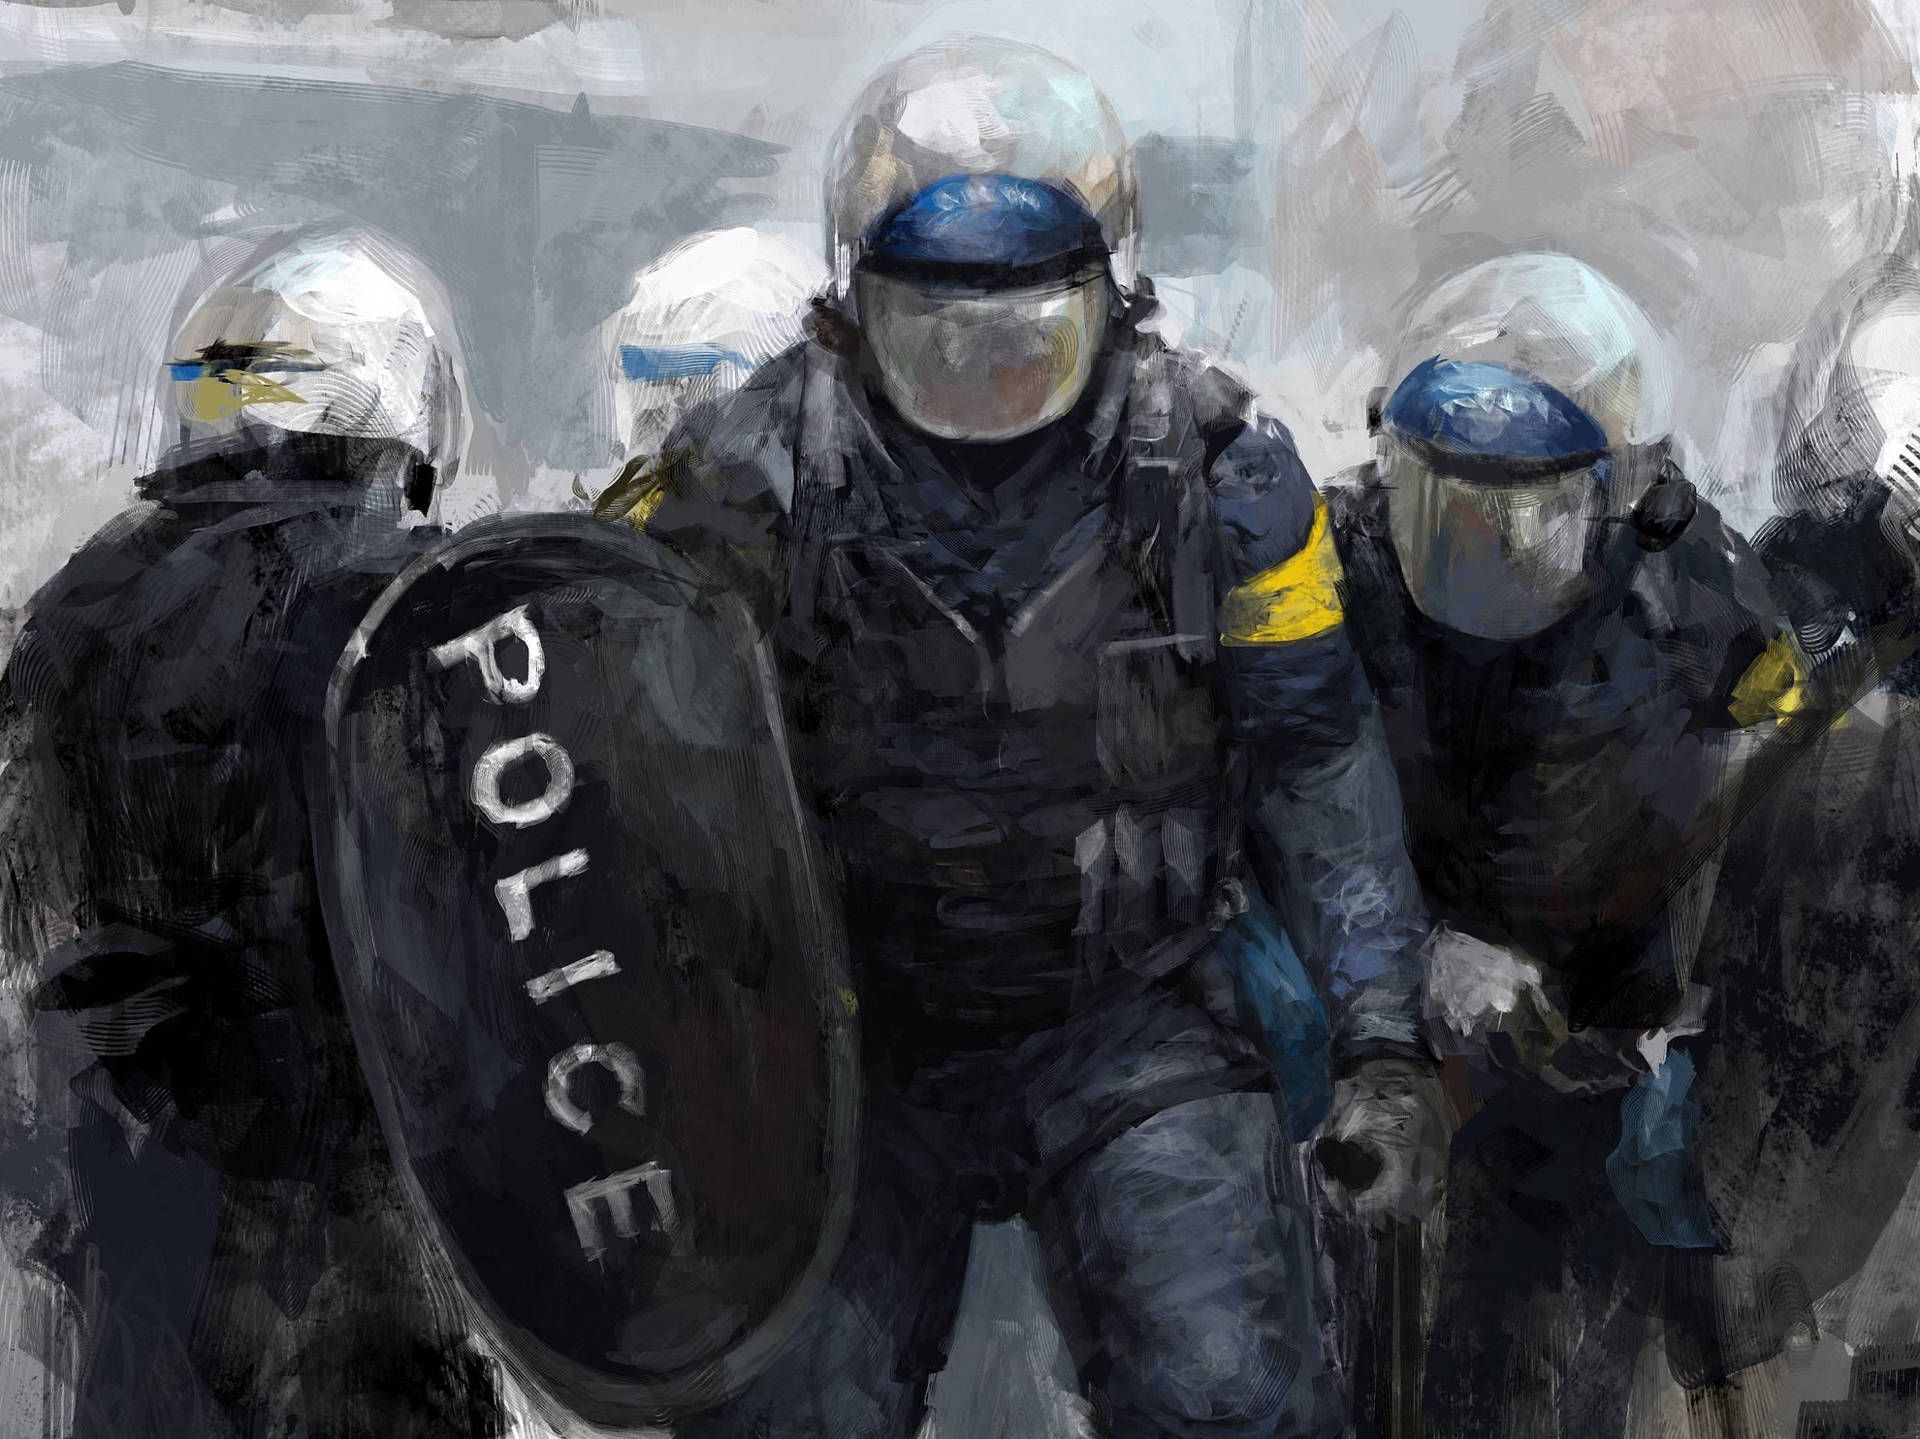 Free Police Wallpaper Downloads, Police Wallpaper for FREE